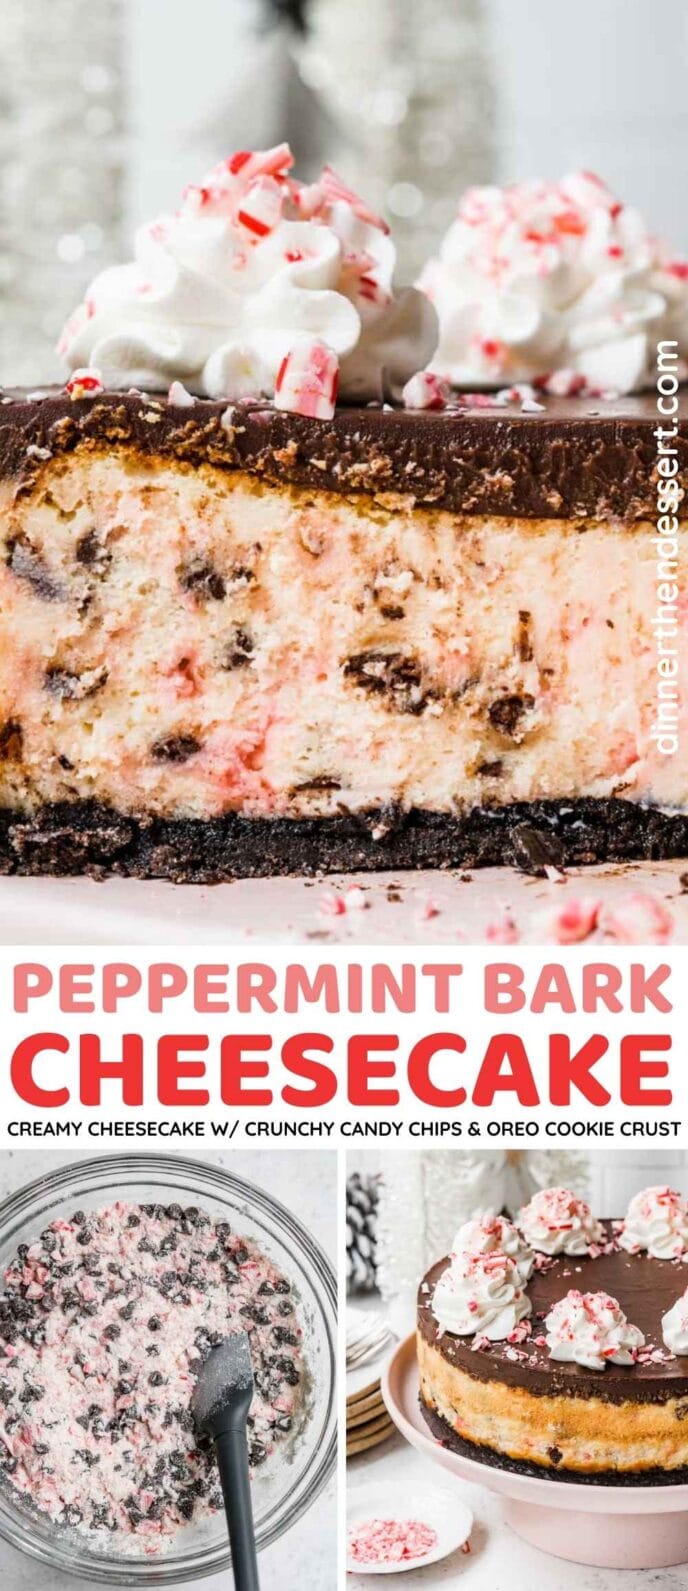 Peppermint Bark Cheesecake Collage